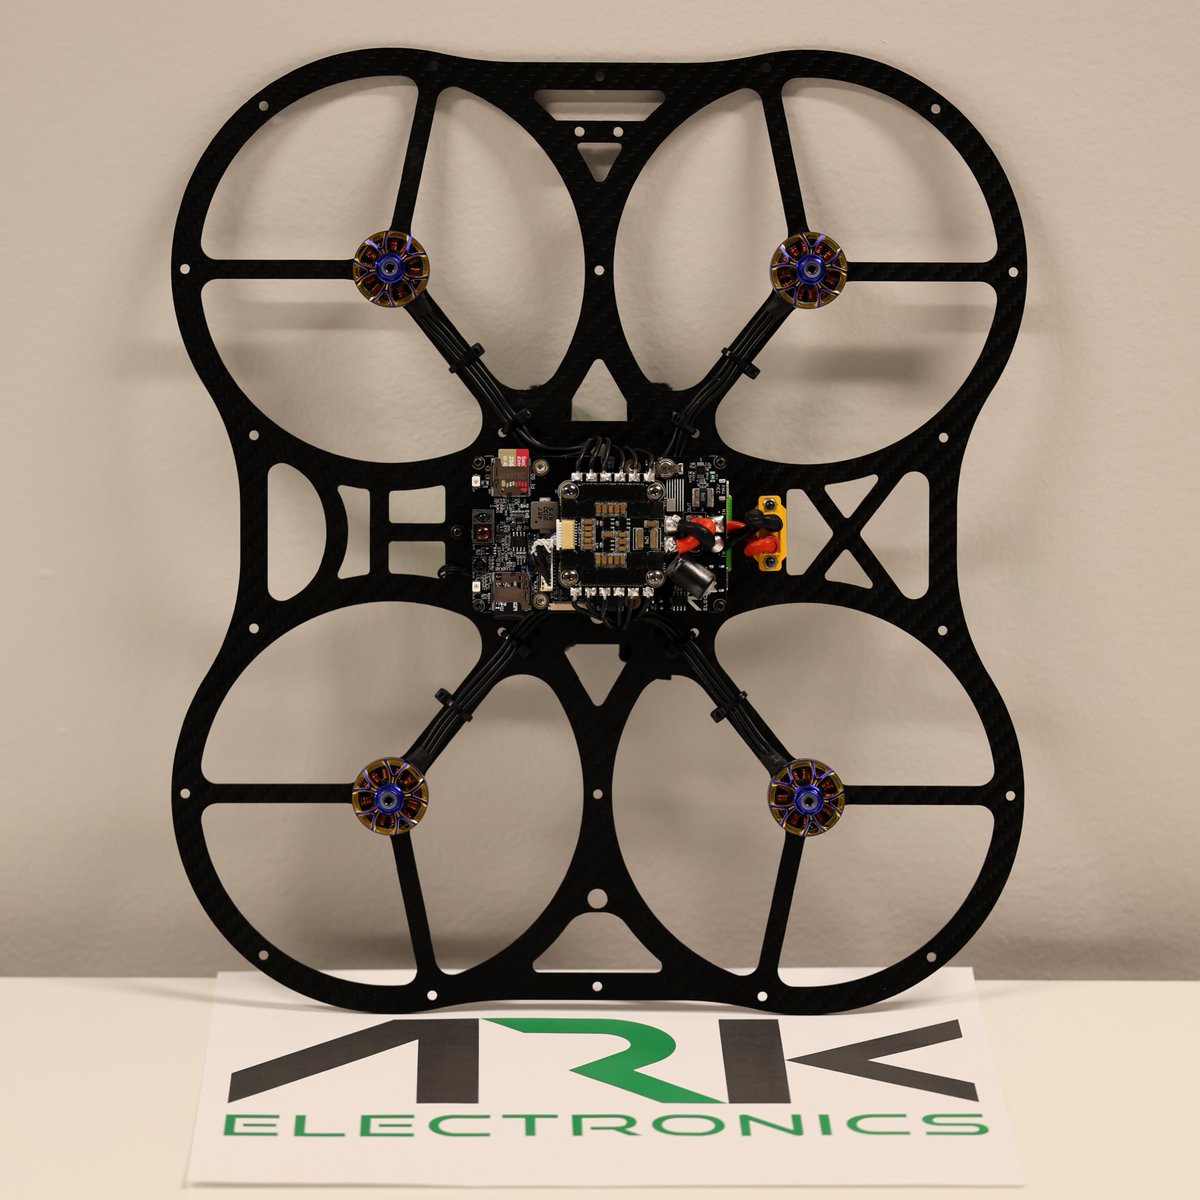 Presenting the first @DroneBlocks DEXI airframe using the ARK Pi6X Flow! Designed in collaboration with @Momentum_Drones, what you see here is the entire vehicle minus the bottom plate. The ARK Pi6X Flow combines an ARKV6X Flight Controller, ARK Flow, @Raspberry_Pi CM4, Power…